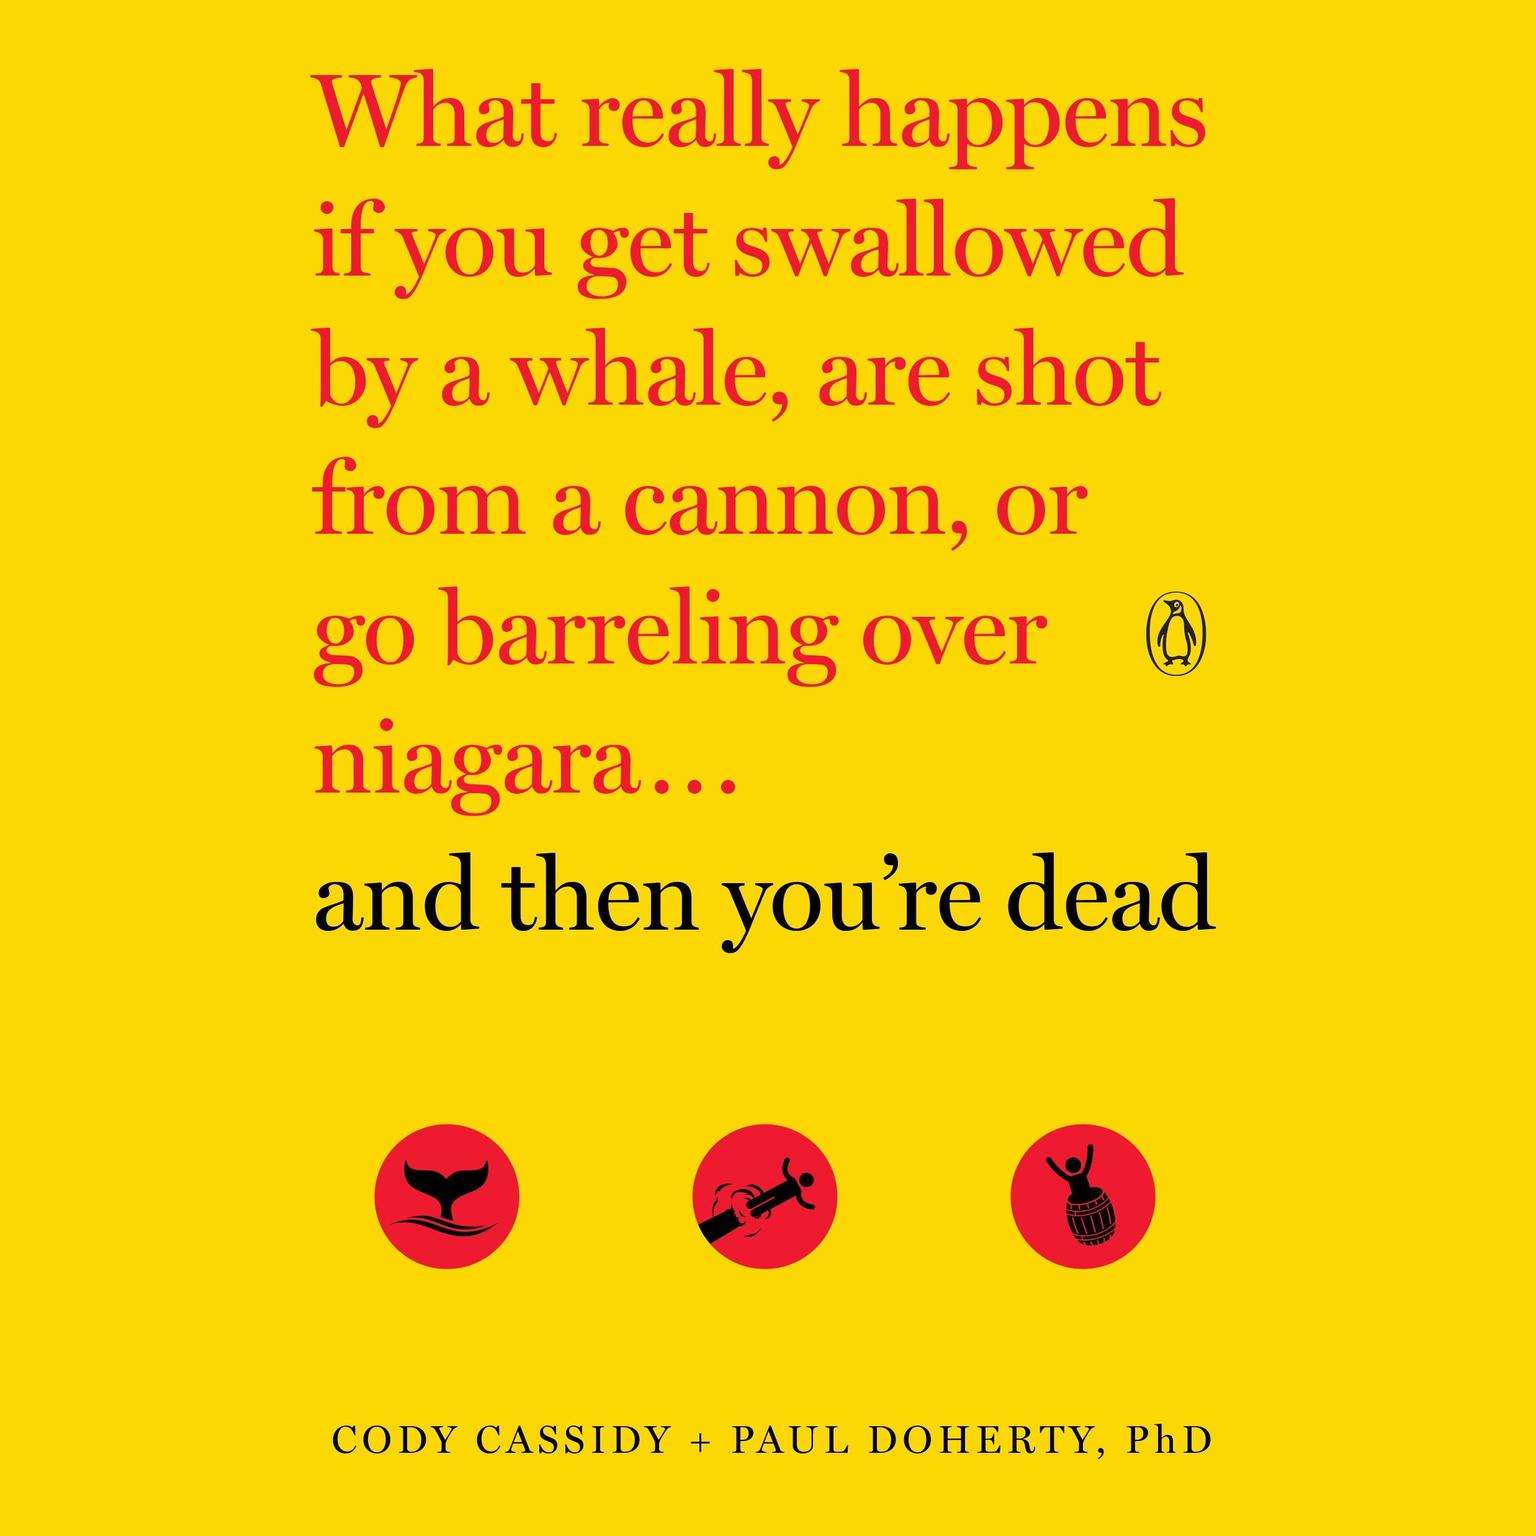 And Then Youre Dead: What Really Happens If You Get Swallowed by a Whale, Are Shot from a Cannon, or Go Barreling Over Niagara Audiobook, by Paul Doherty